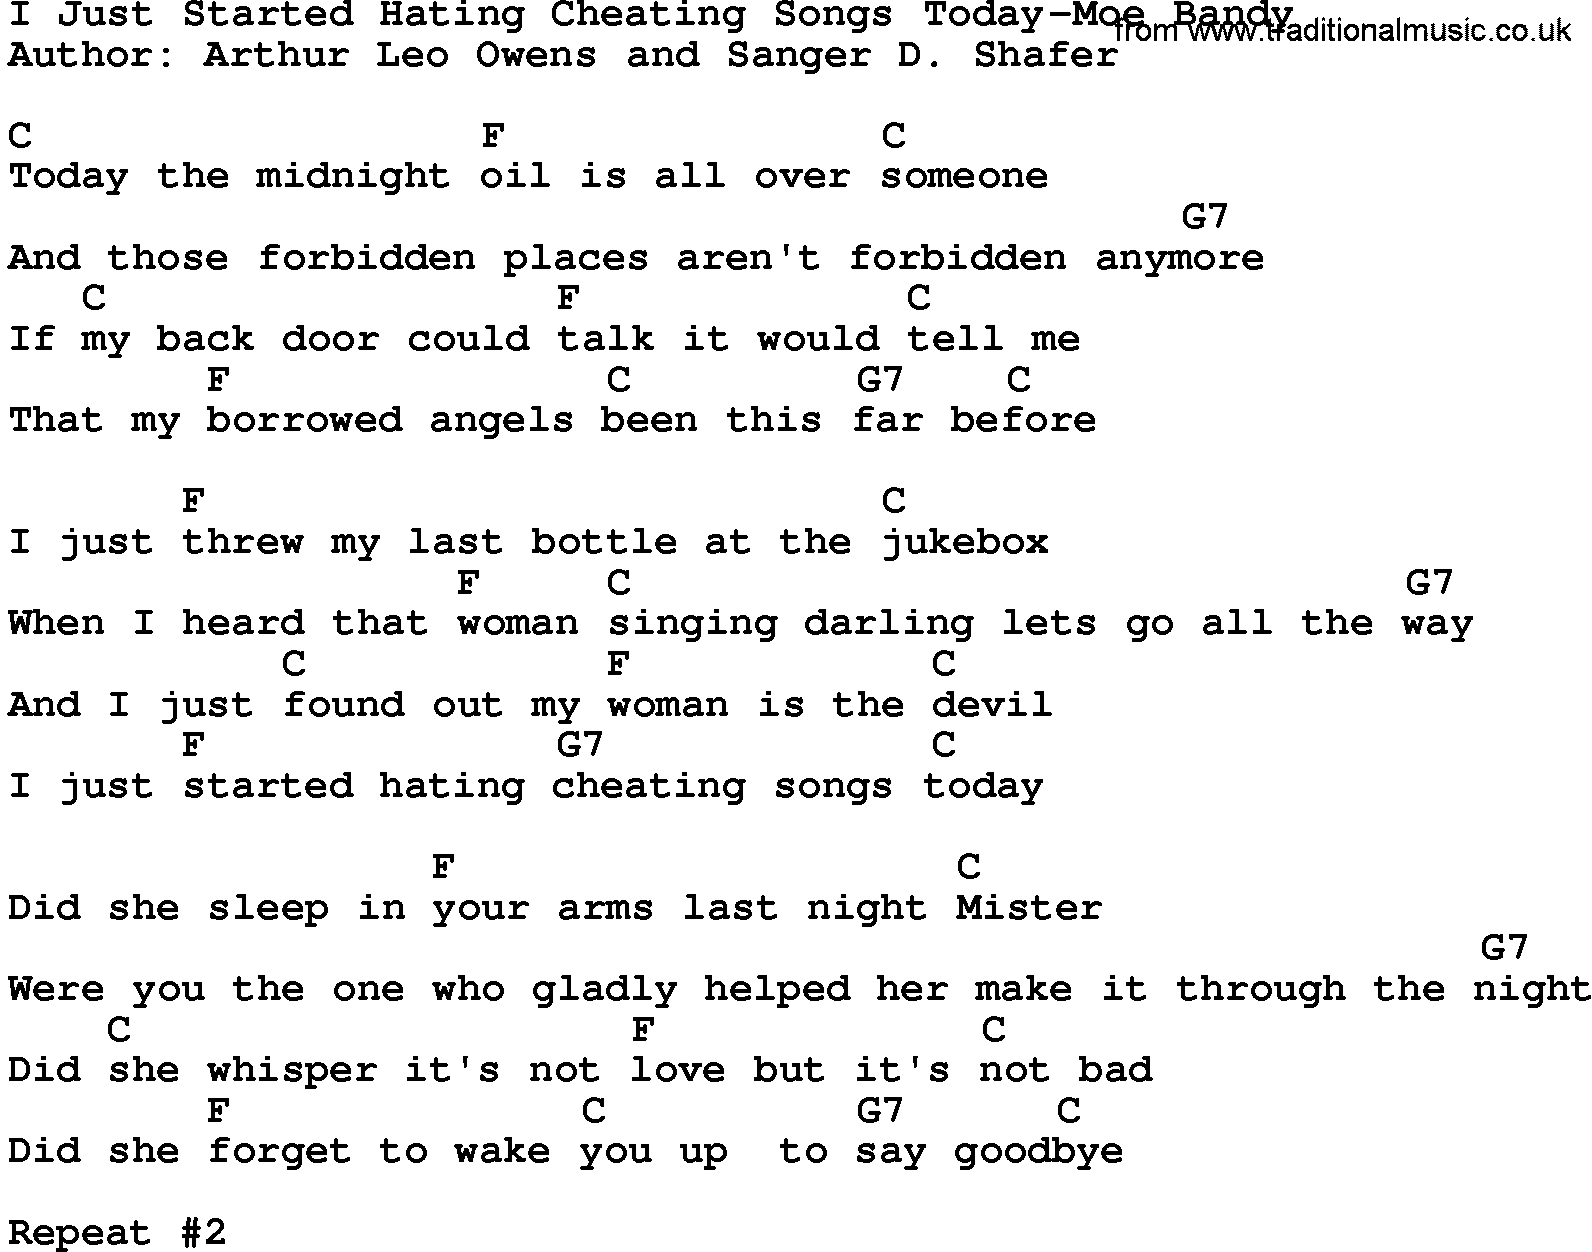 Country music song: I Just Started Hating Cheating Songs Today-Moe Bandy lyrics and chords